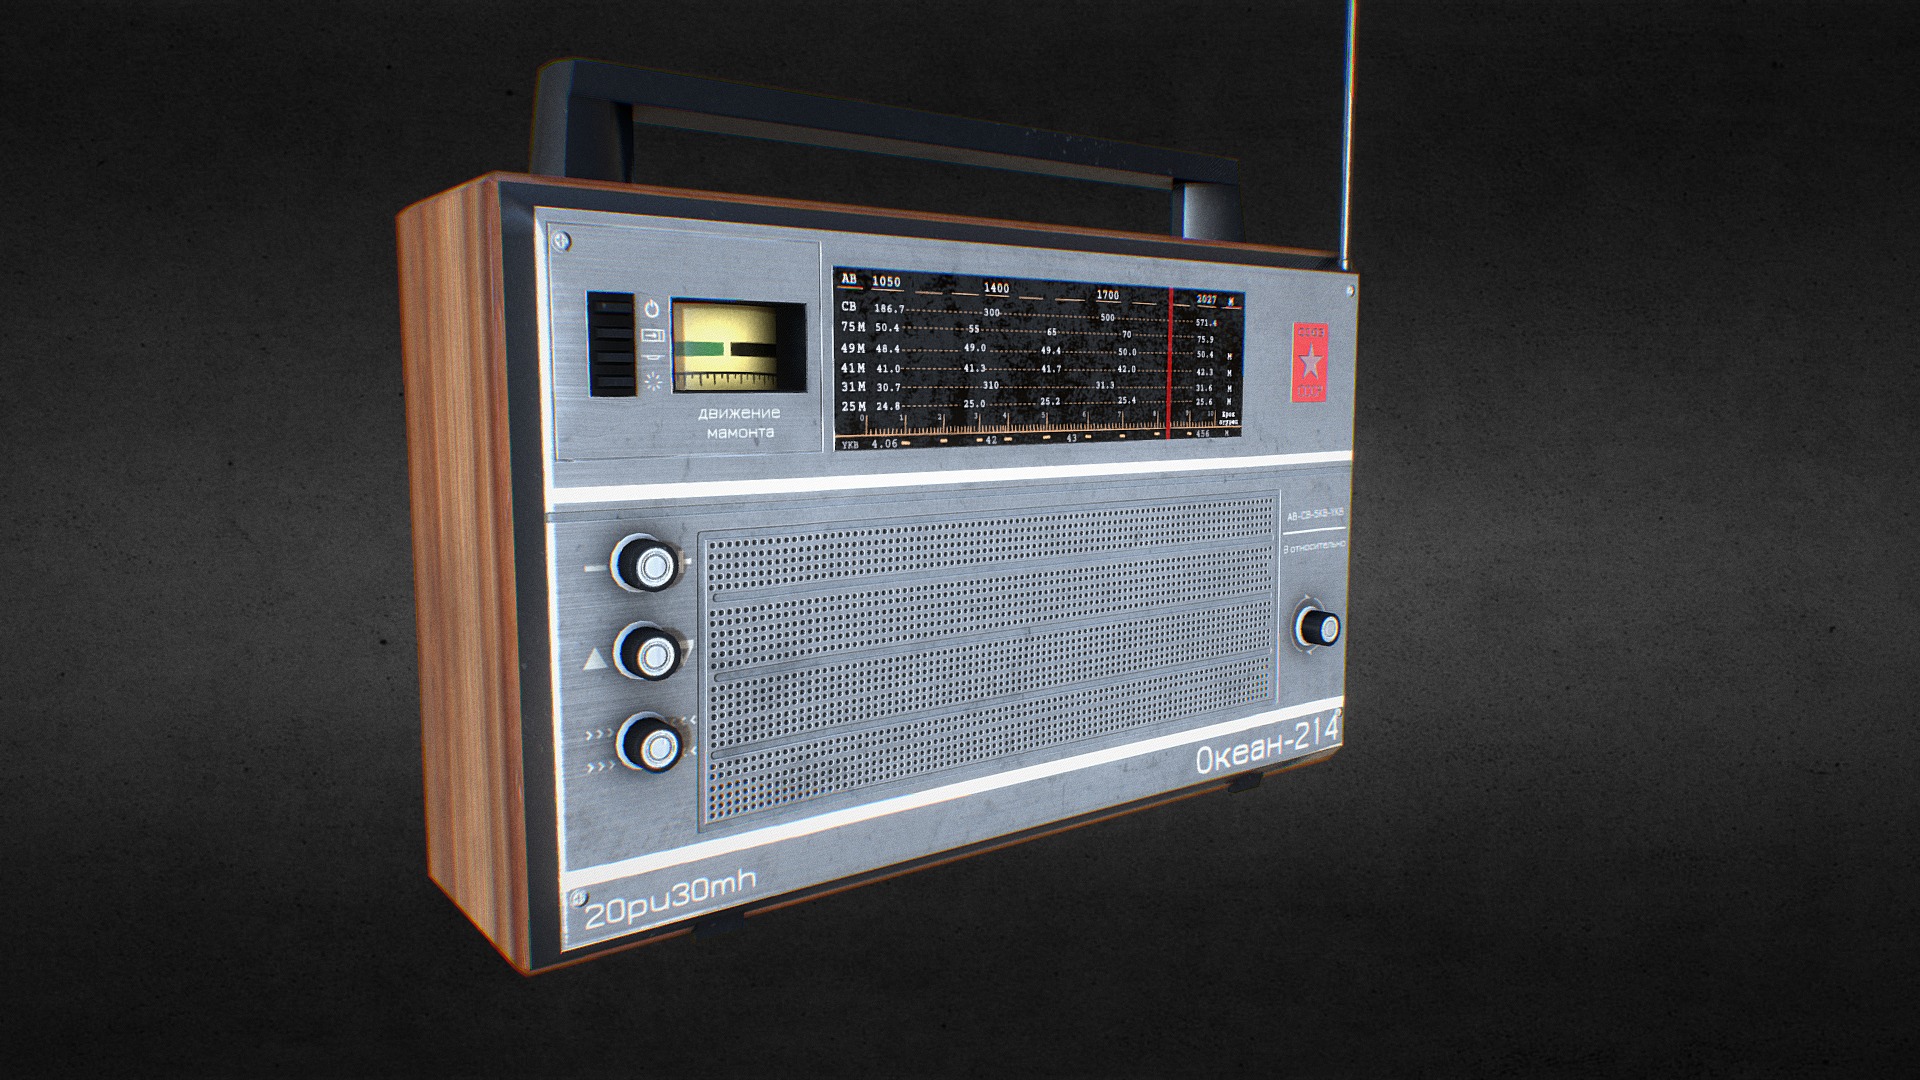 3D model Okeah 214 - This is a 3D model of the Okeah 214. The 3D model is about a rectangular electronic device.